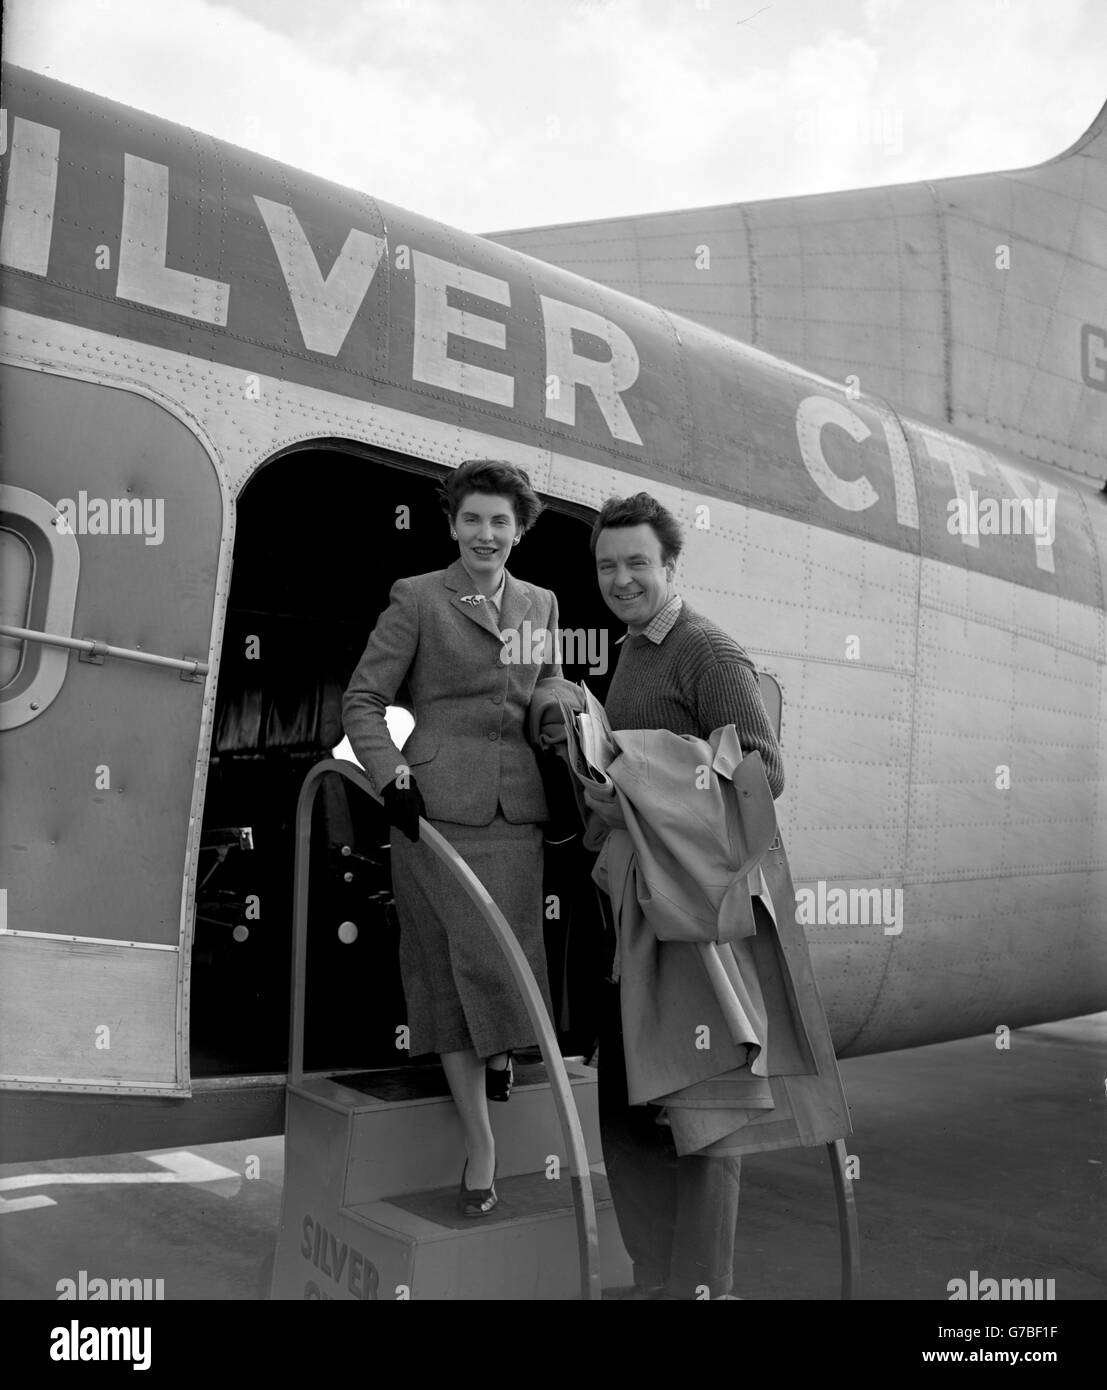 British actor Donald Sinden with his wife Diana. They are flying to Le Touquet, before driving to Cannes for the film festival. Stock Photo